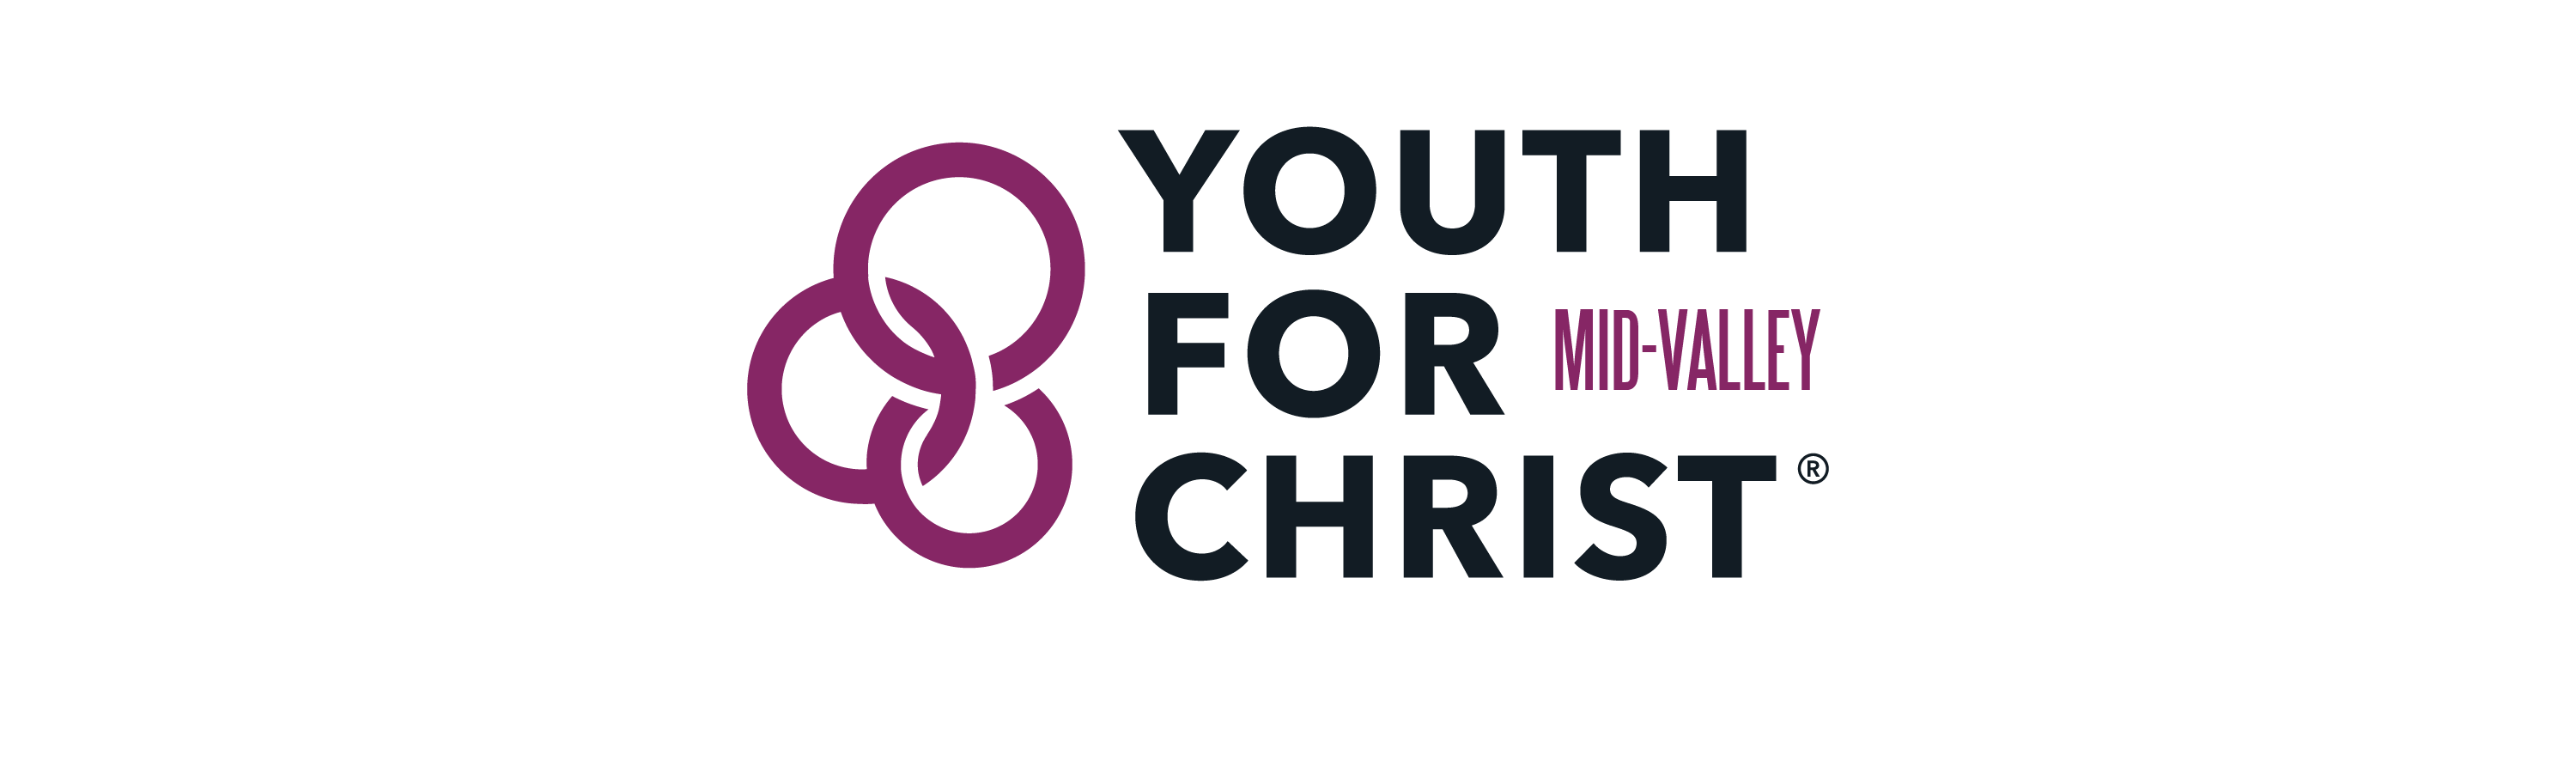 Juvenile Justice Ministry Mid Valley Youth For Christ